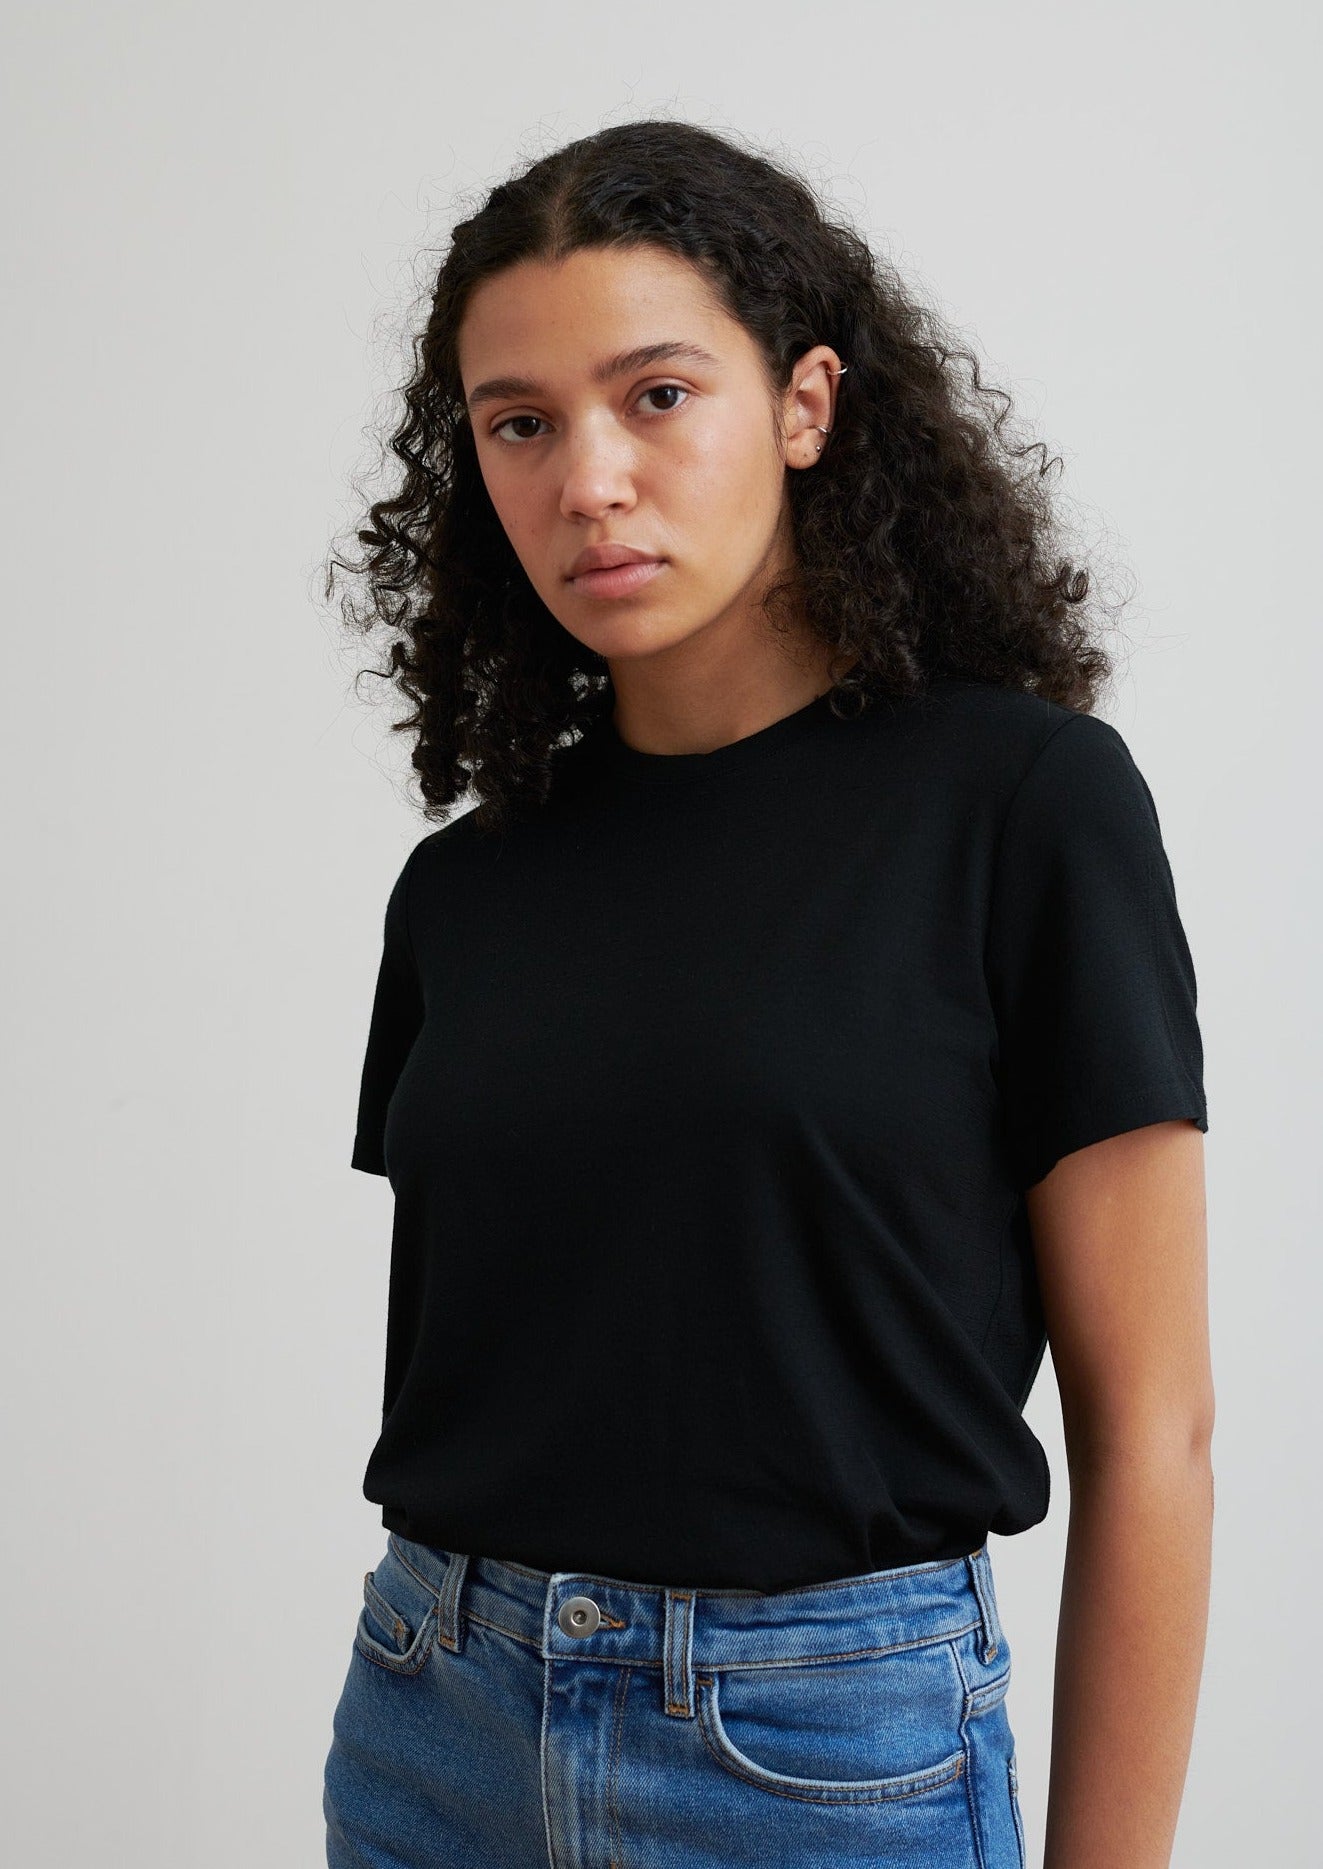 Classic t-shirt in lightweight merino is soft and breathable to wear all seasons—Shop luxury essentials in ethical, sustainable, and traceable wool.